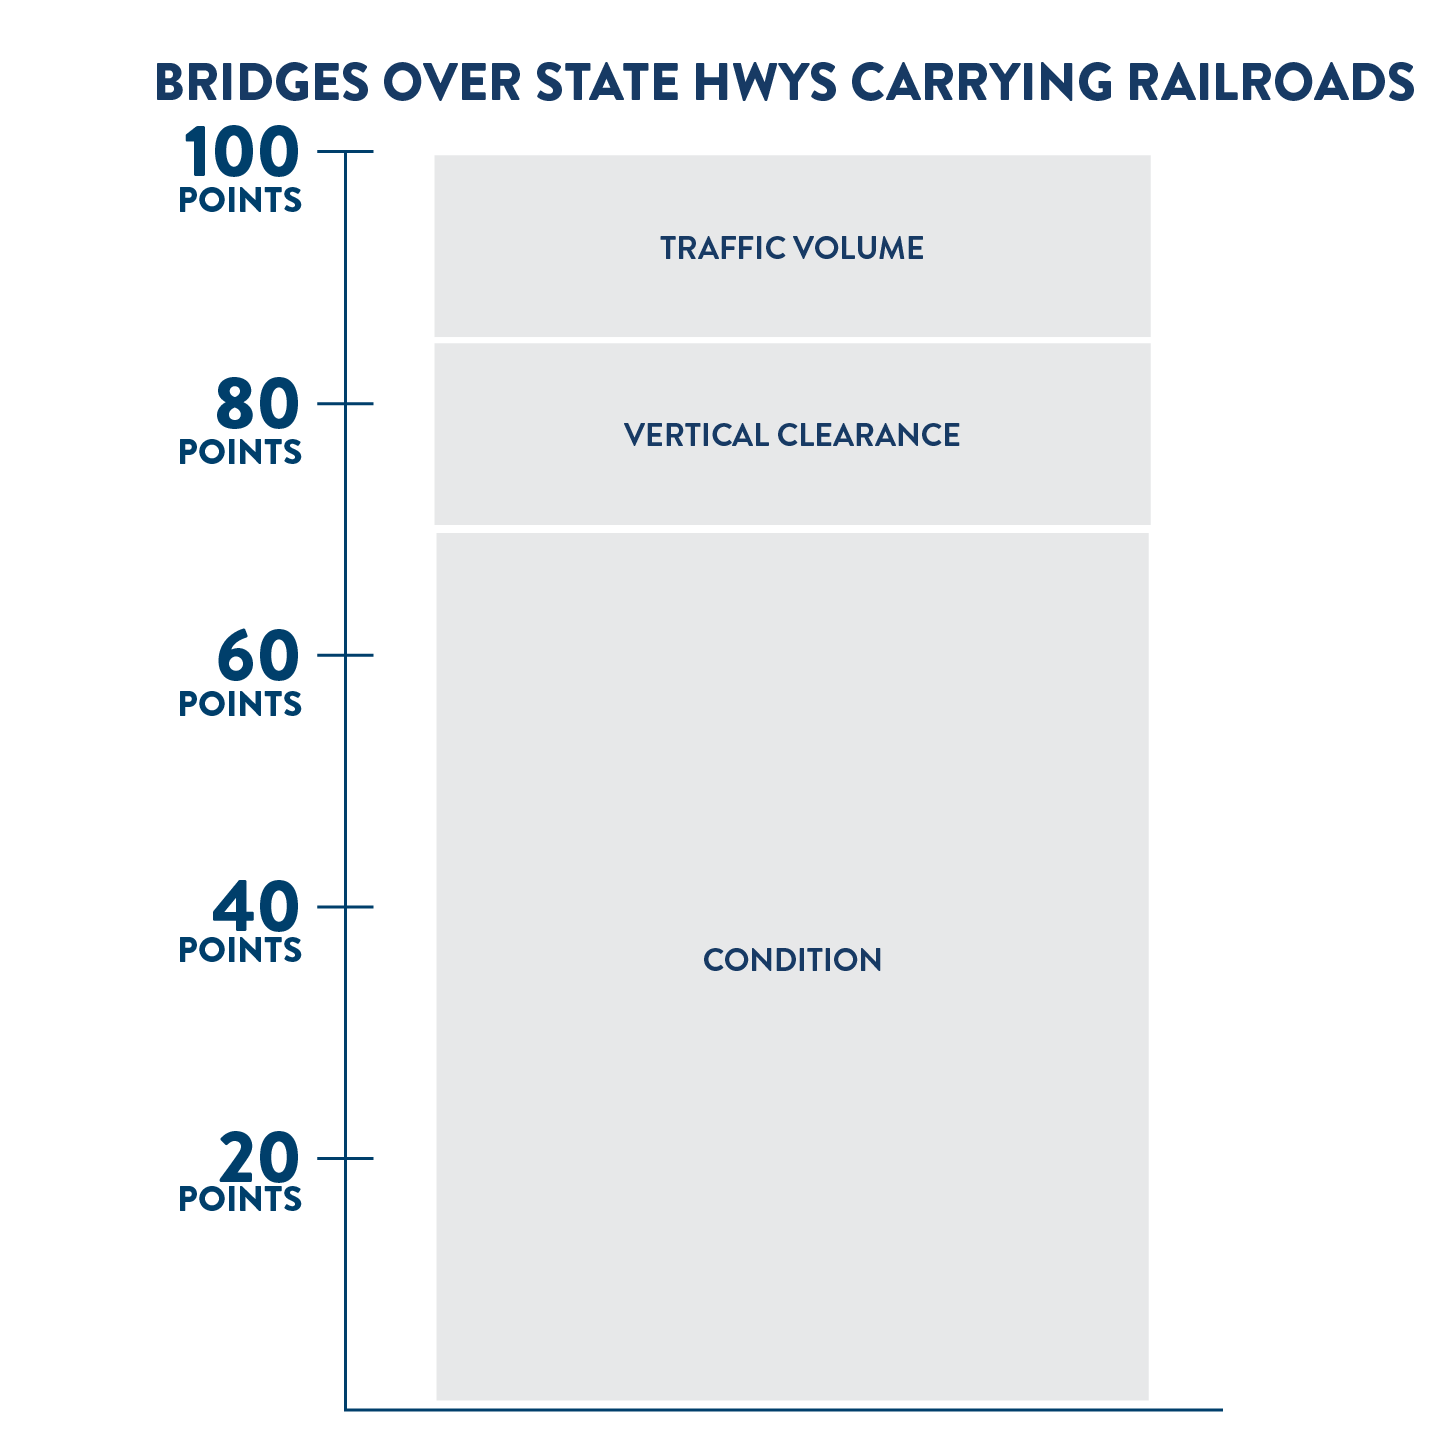 Scoring criteria for projects to rehabilitate or replace bridges carrying railroads over state highways. Out of 100 possible points, 70 points are based on the condition of the bridge, 15 points are based on vertical clearance, and 15 points are based traffic volume. 